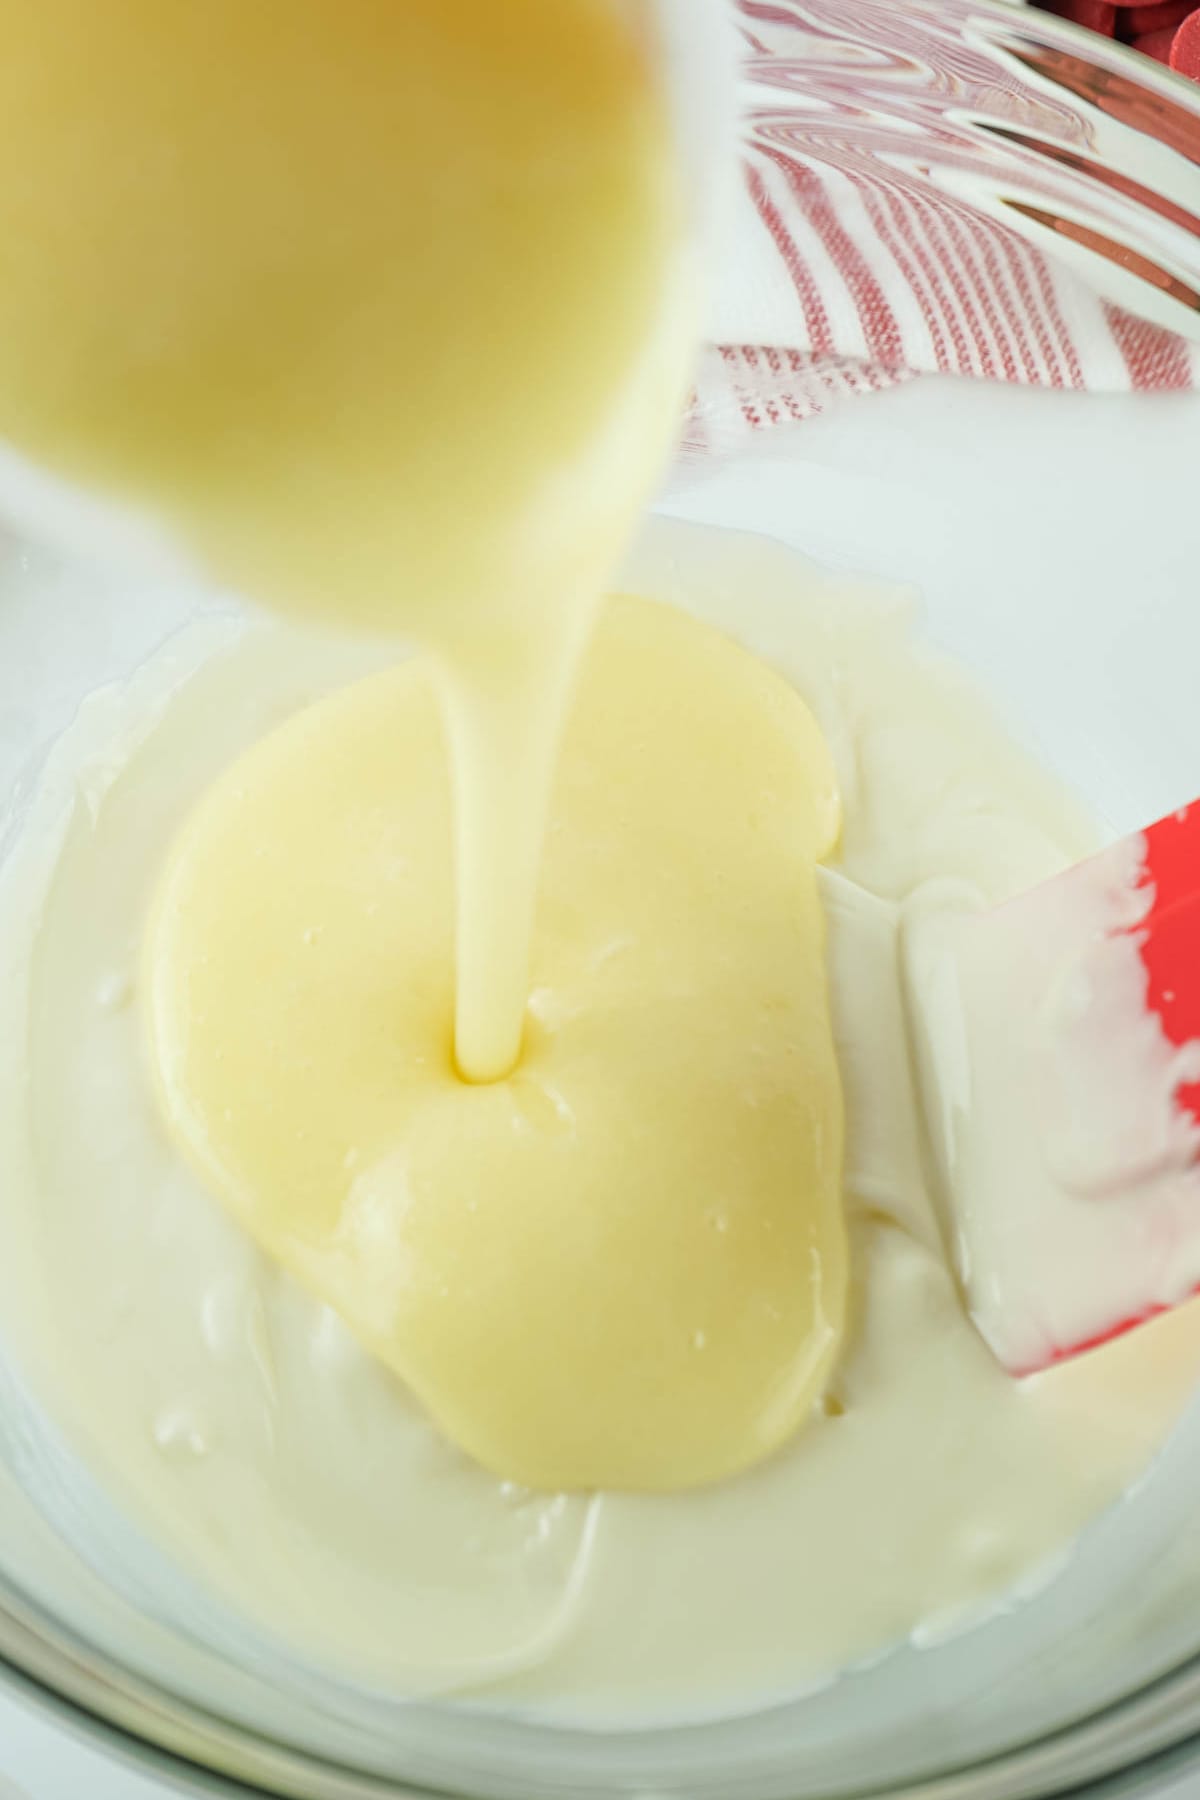 Pouring melted icing into melted white chocolate